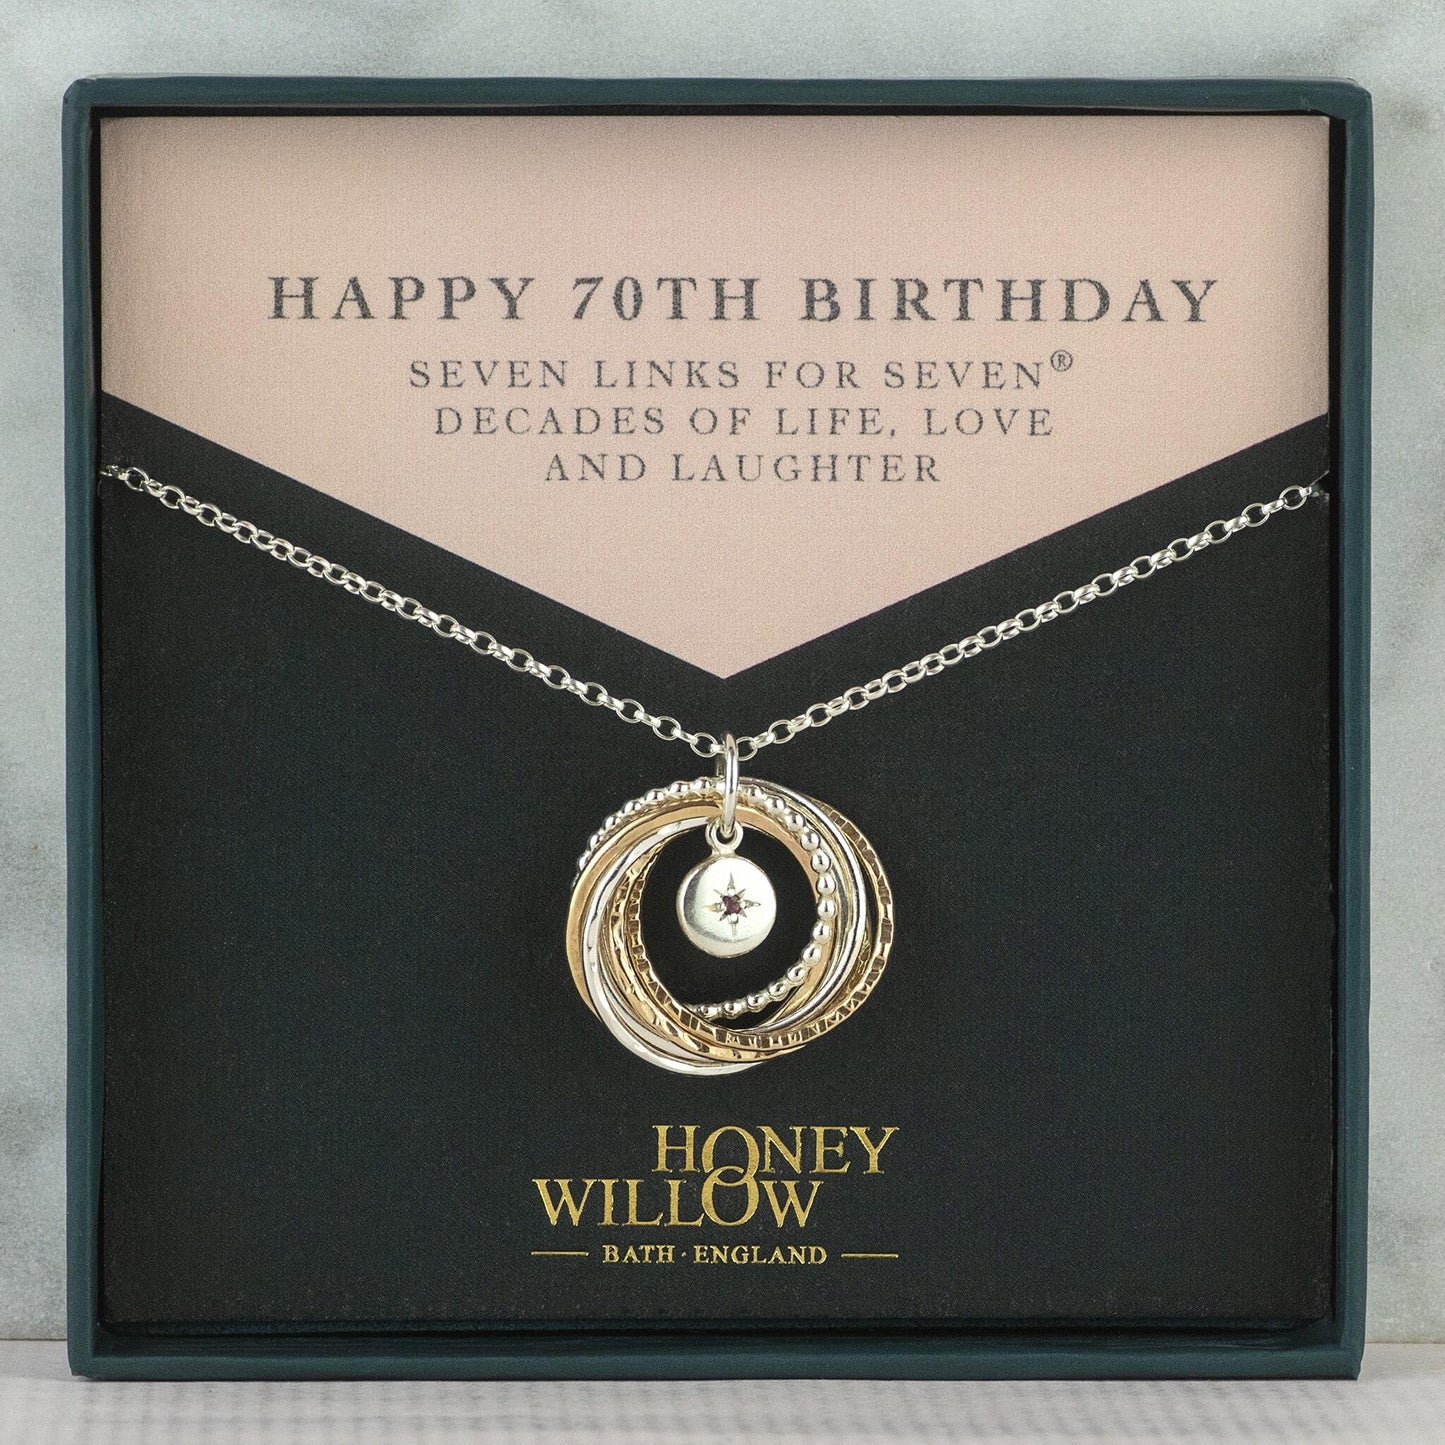 70th Birthday Birthstone Necklace - Mixed Metal - The Original 7 Links for 7® Decades Necklace